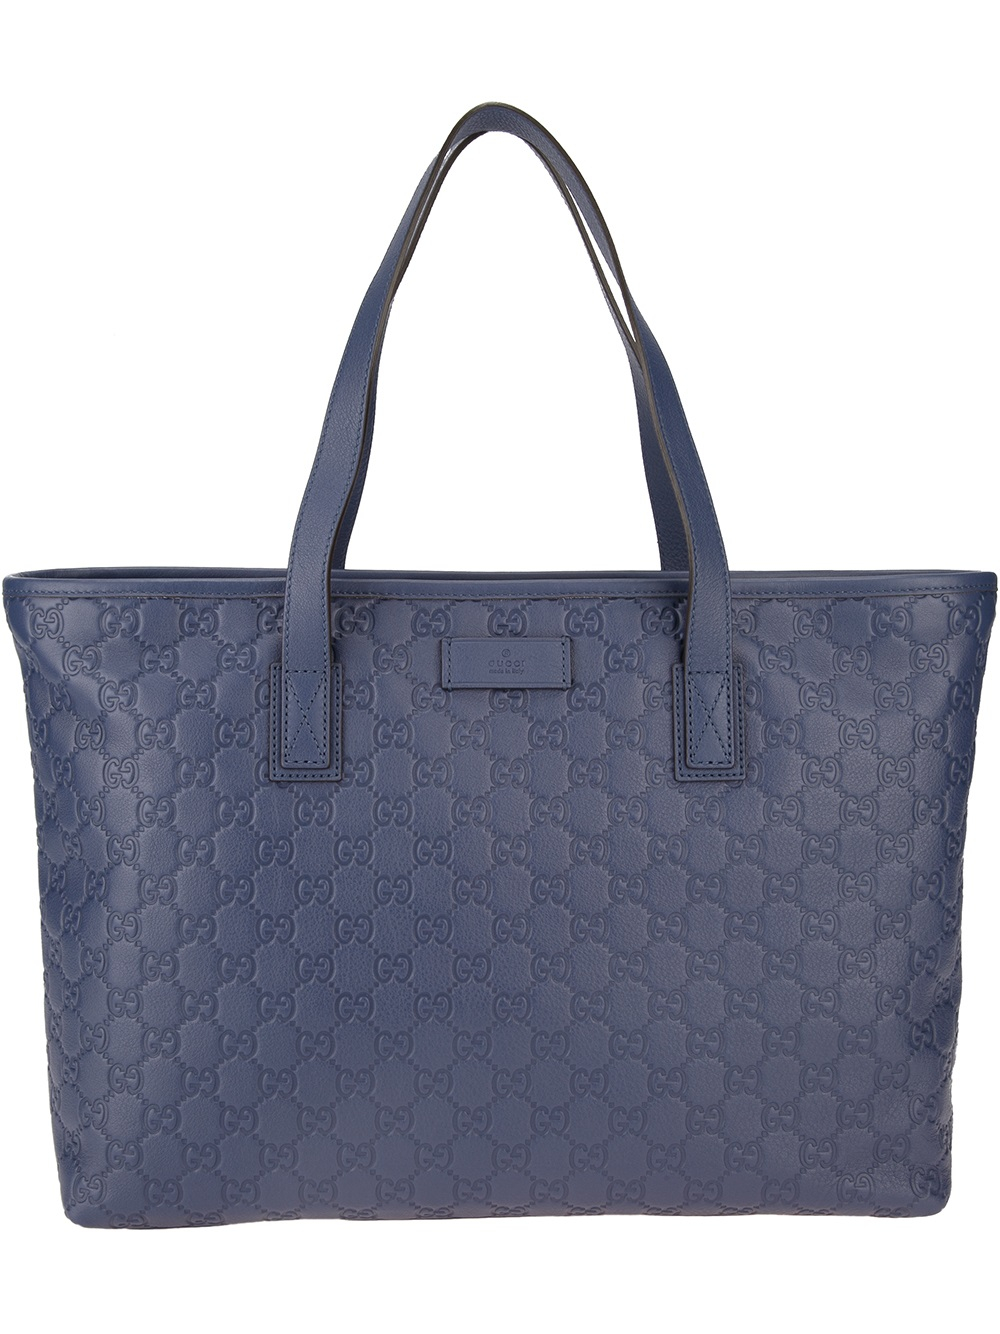 gucci embossed tote, OFF 77%,www 